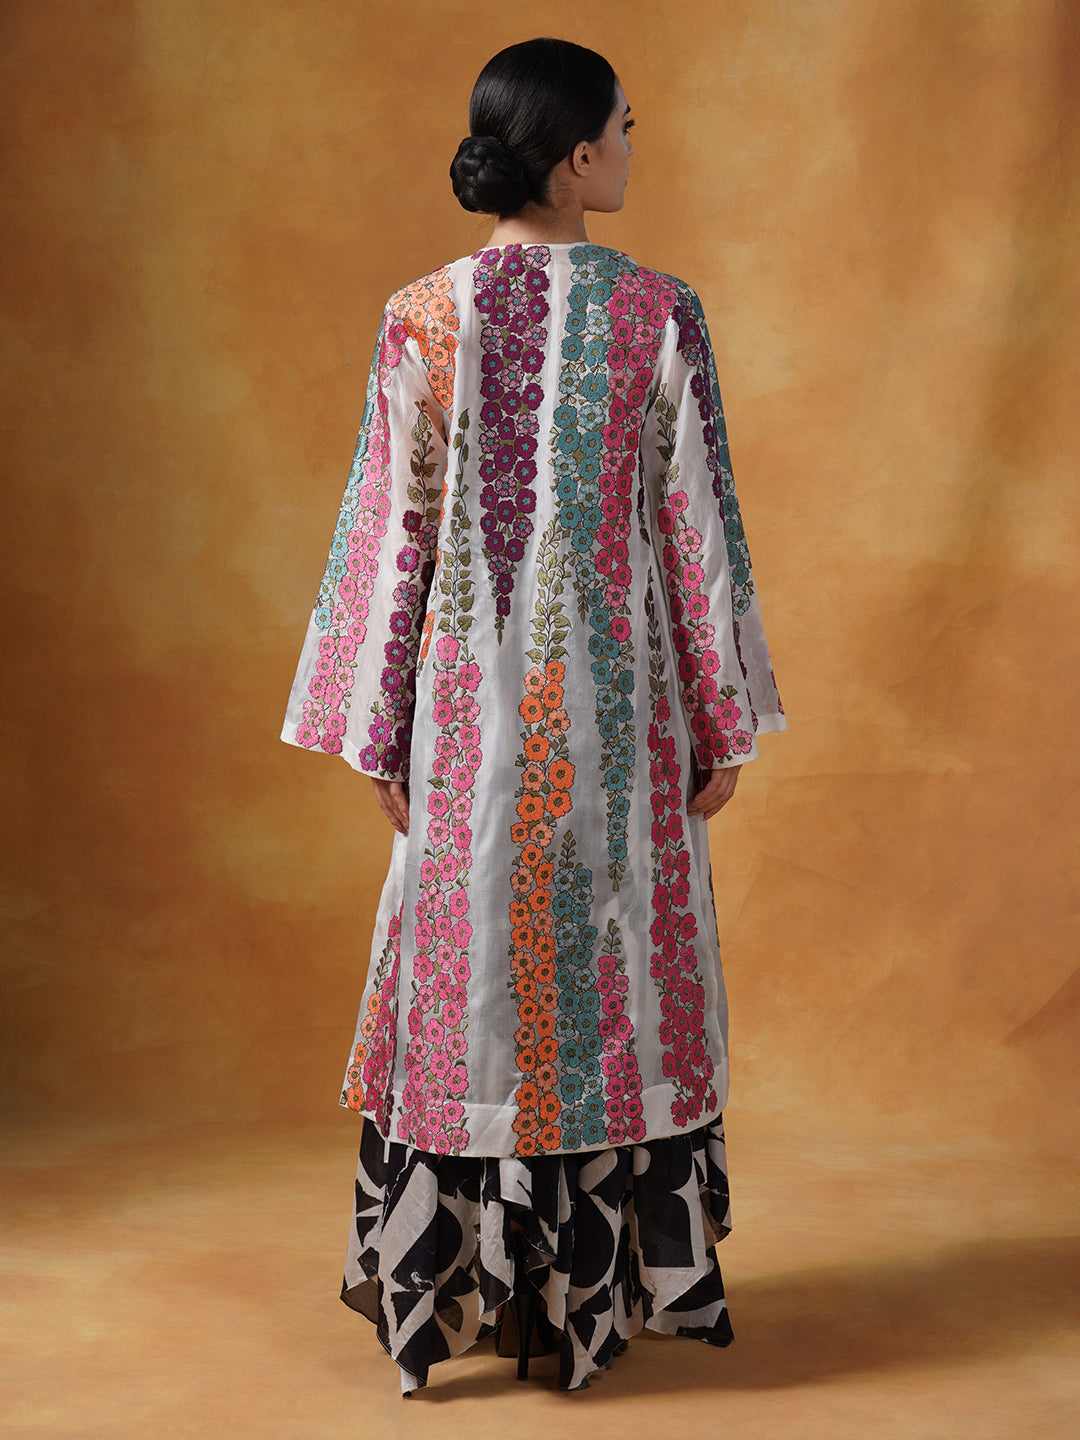 organza jacket adorned in beautiful silk thread floral embroidery